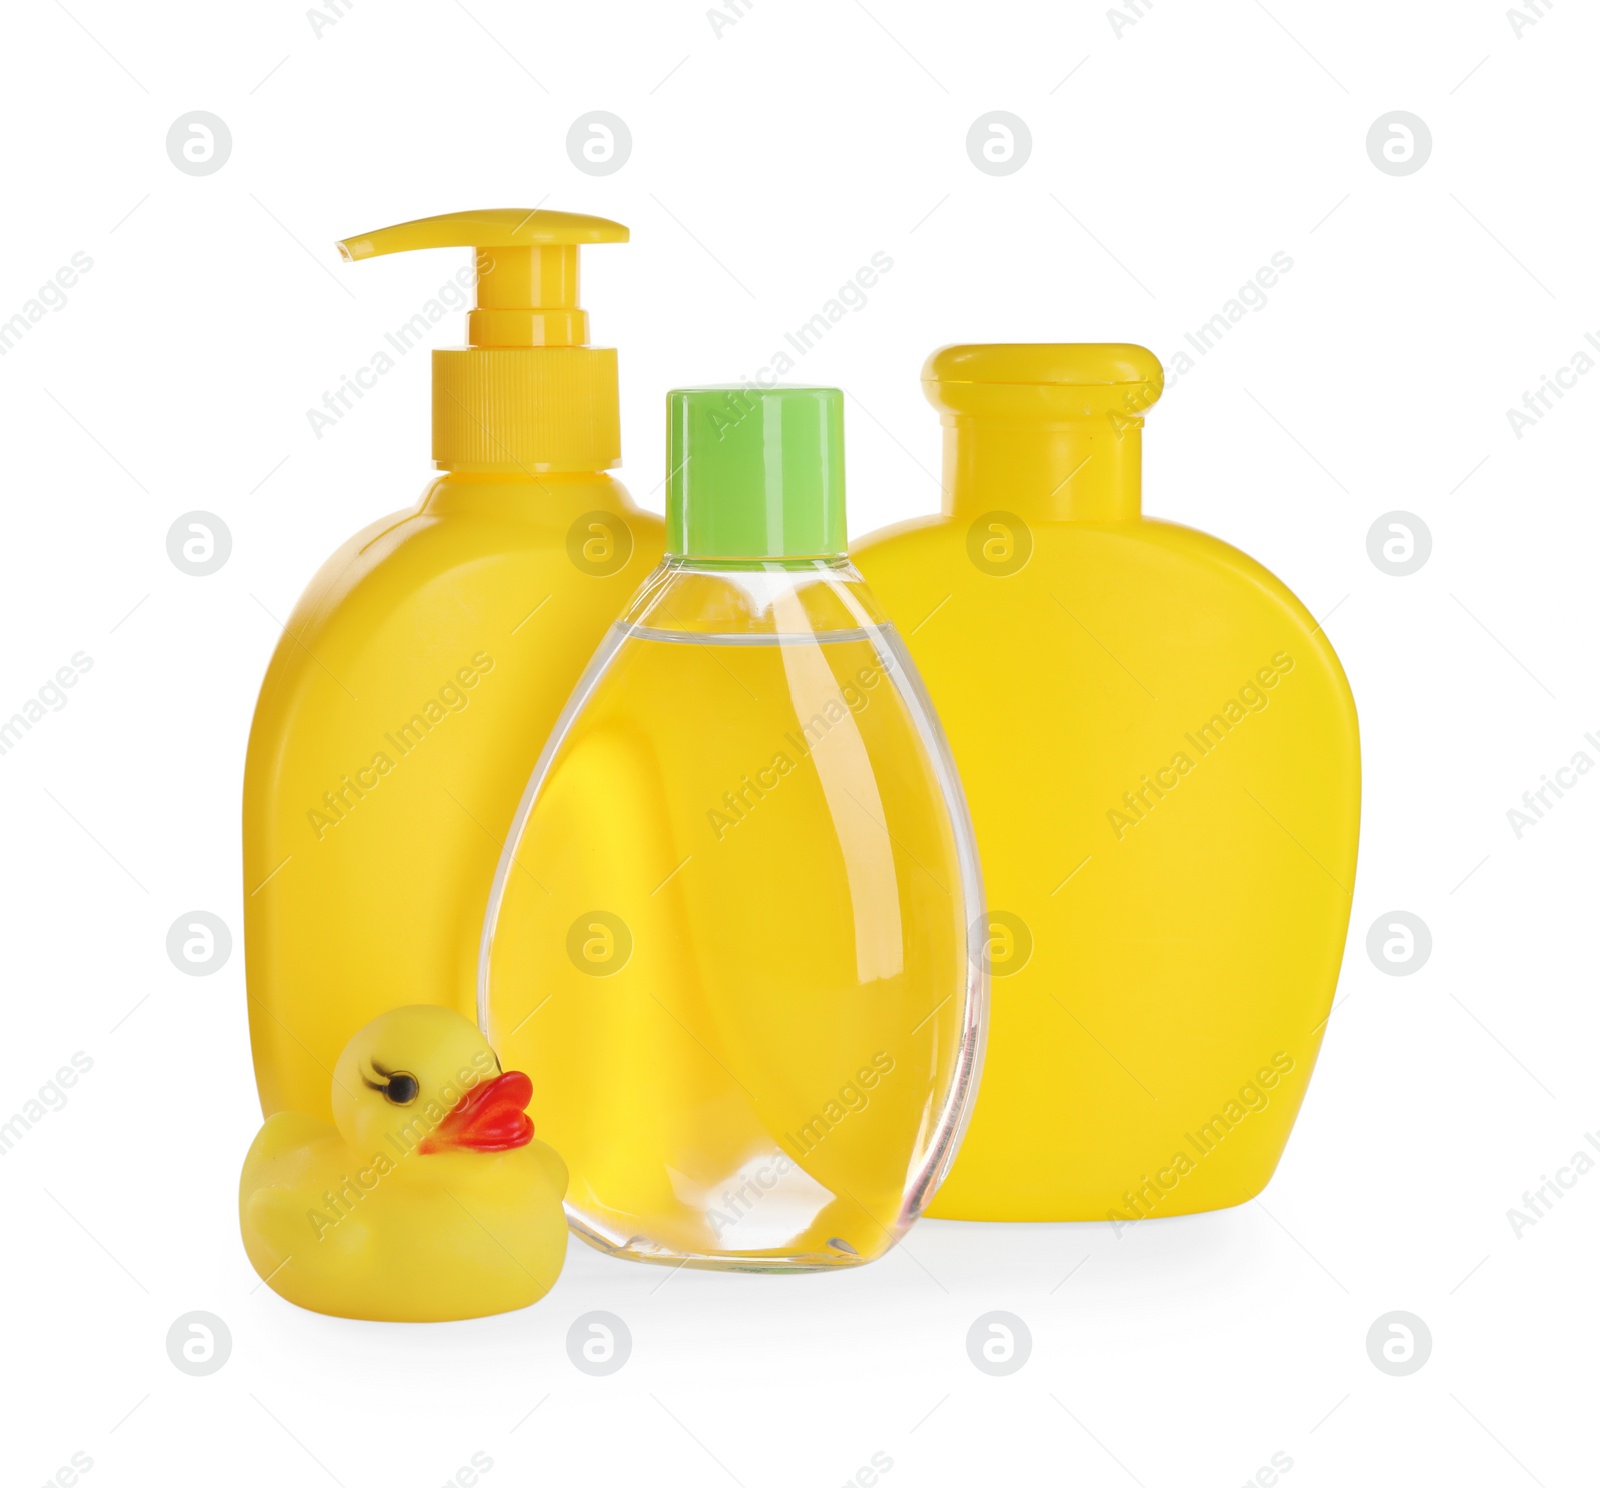 Photo of Bottle of baby oil, other cosmetic products and rubber duck on white background